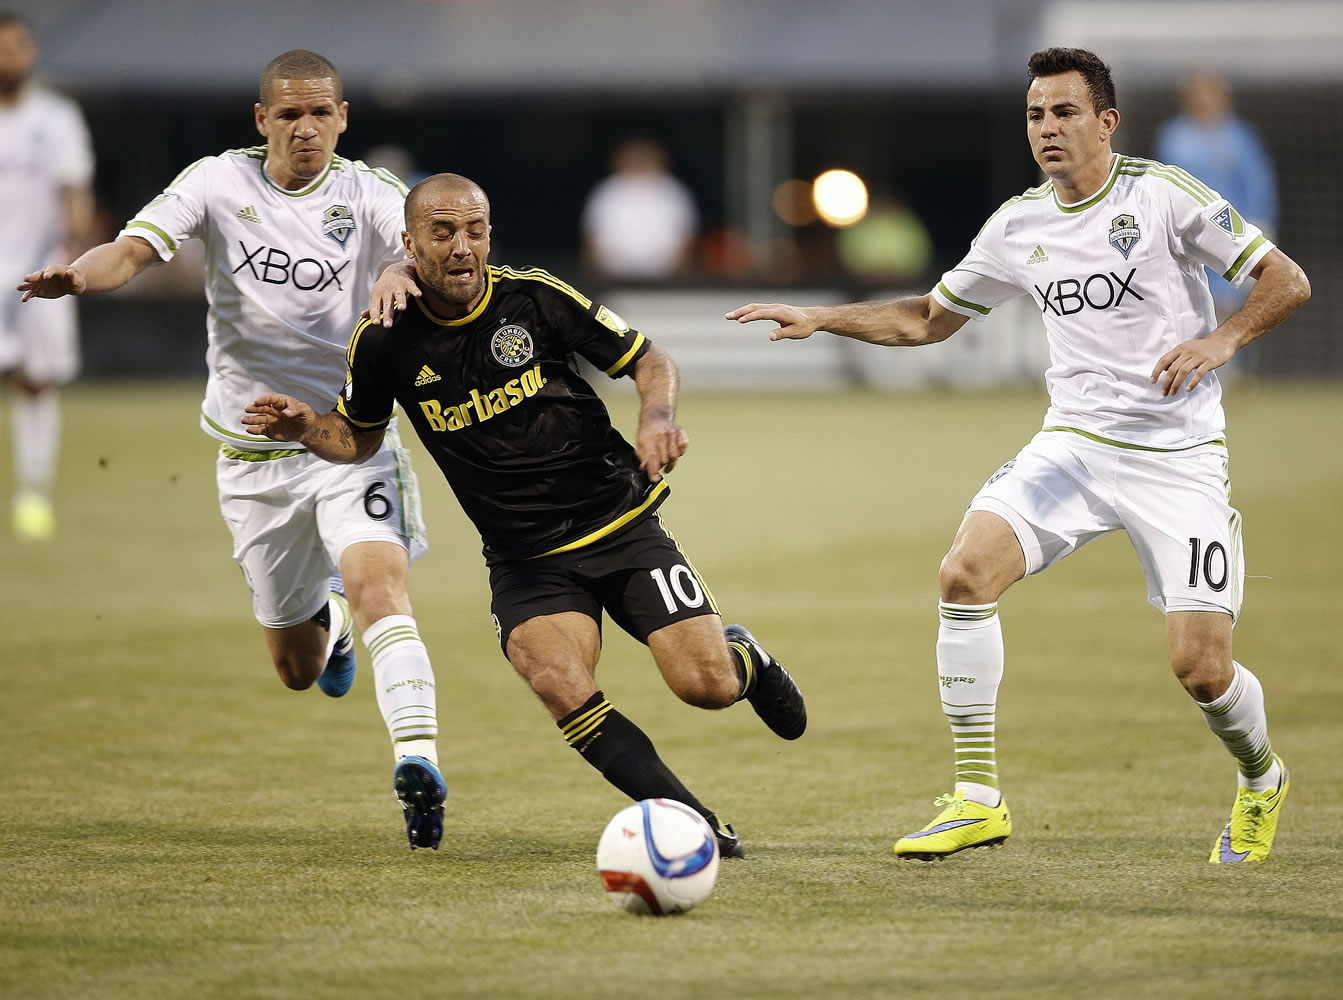 Columbus Crew forward Federico Higuain (10) battles for the ball against Seattle Sounders midfielders Osvaldo Alonso (6) and and Marco Pappa (10) during the first half of an MLS soccer game in Columbus, Ohio, on Saturday, May 9, 2015.